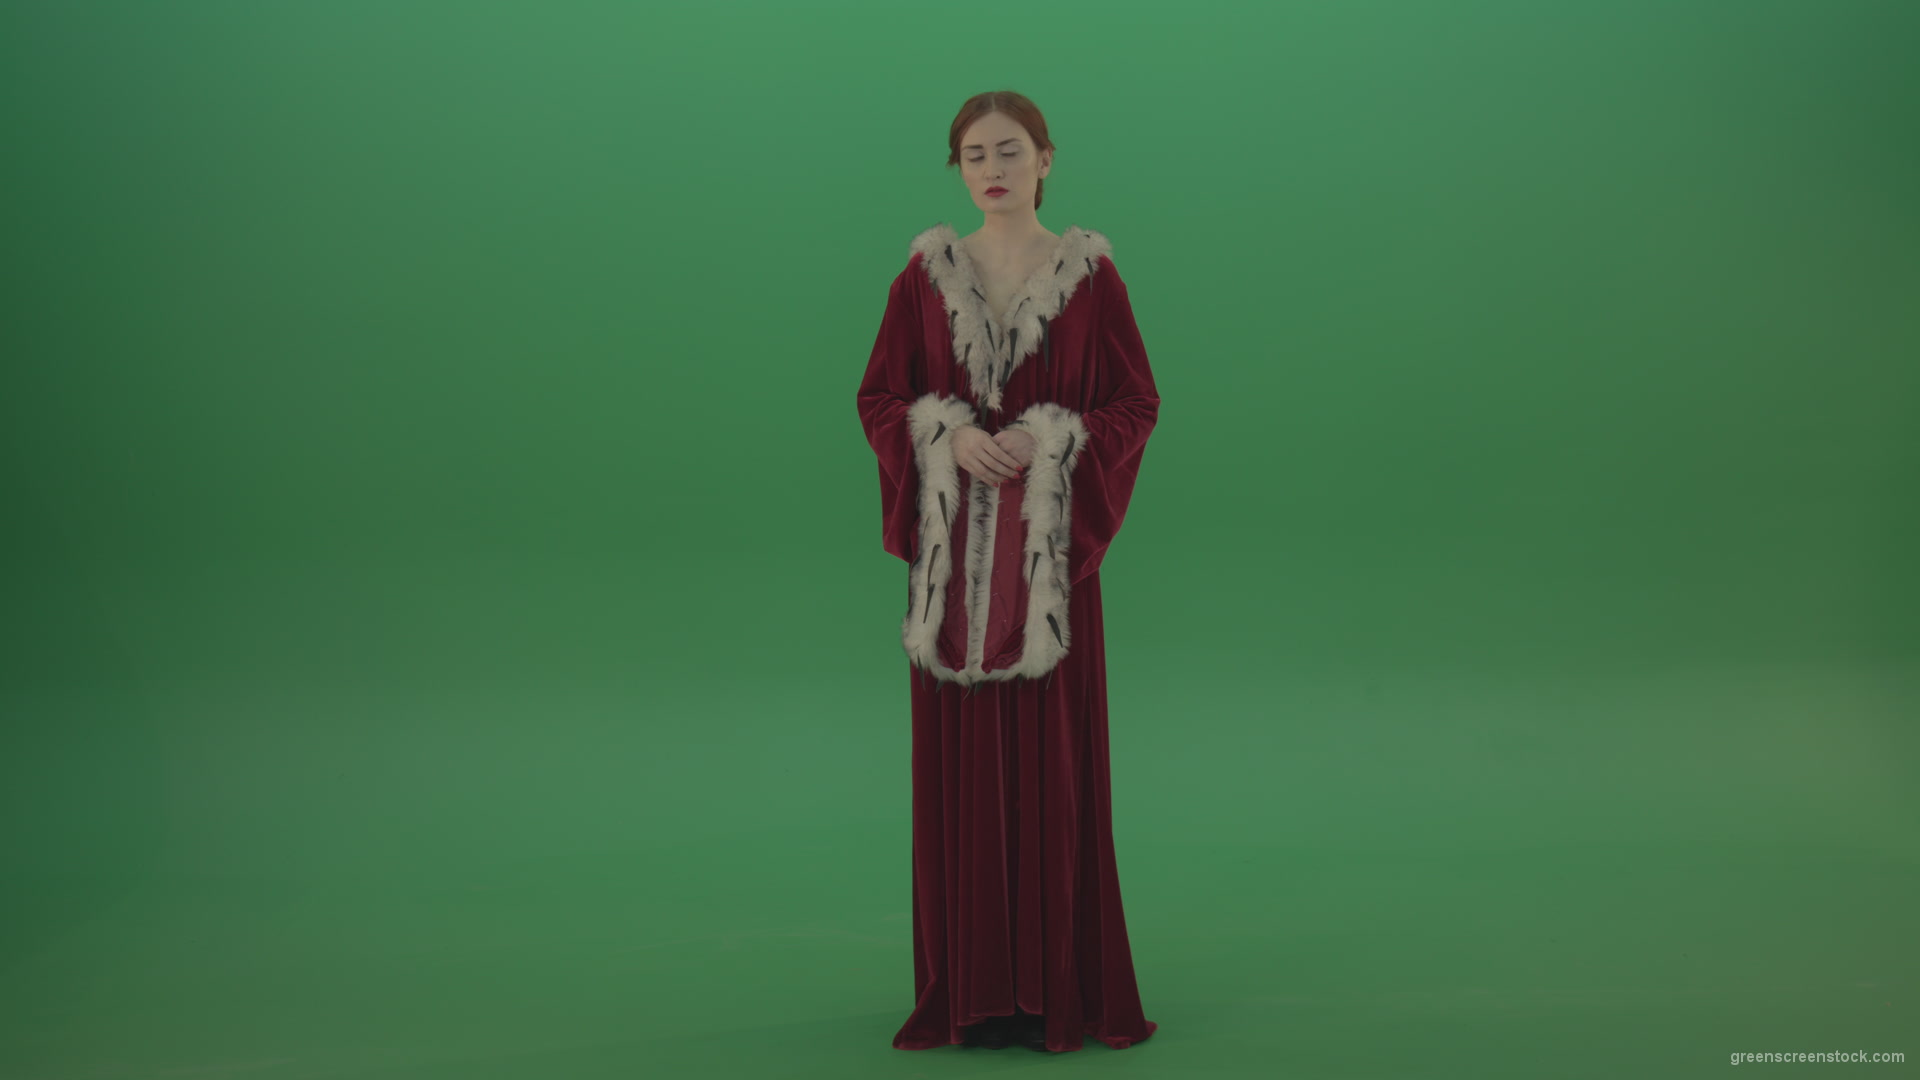 Princess-thinks-and-elegantly-gracefully-turns-her-head-in-different-directions_006 Green Screen Stock